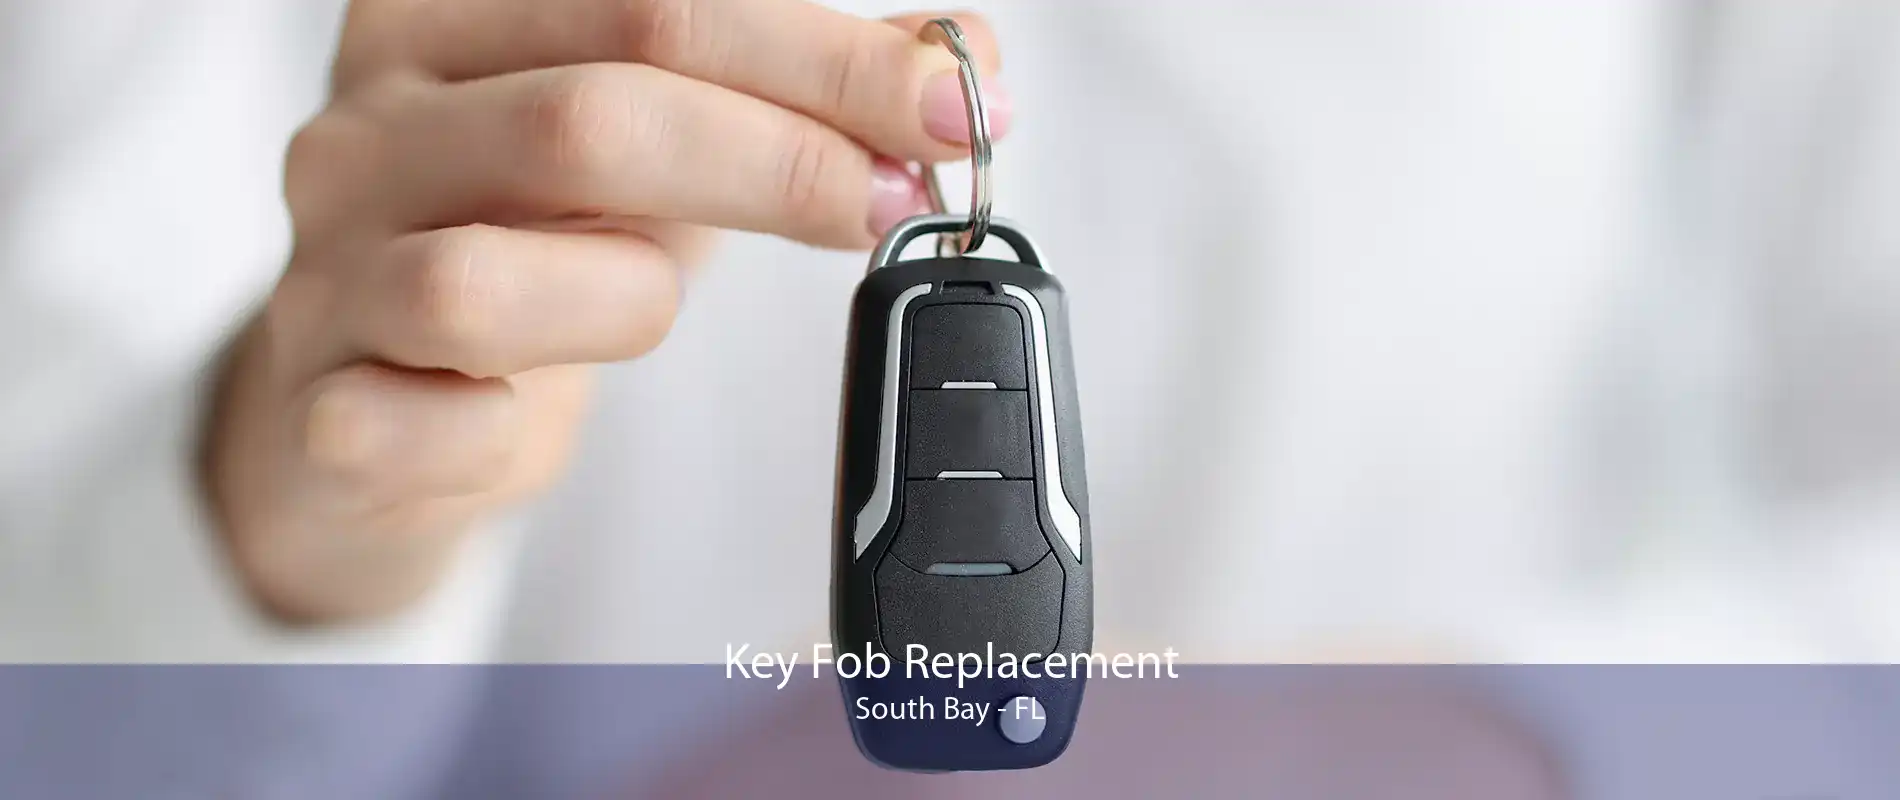 Key Fob Replacement South Bay - FL